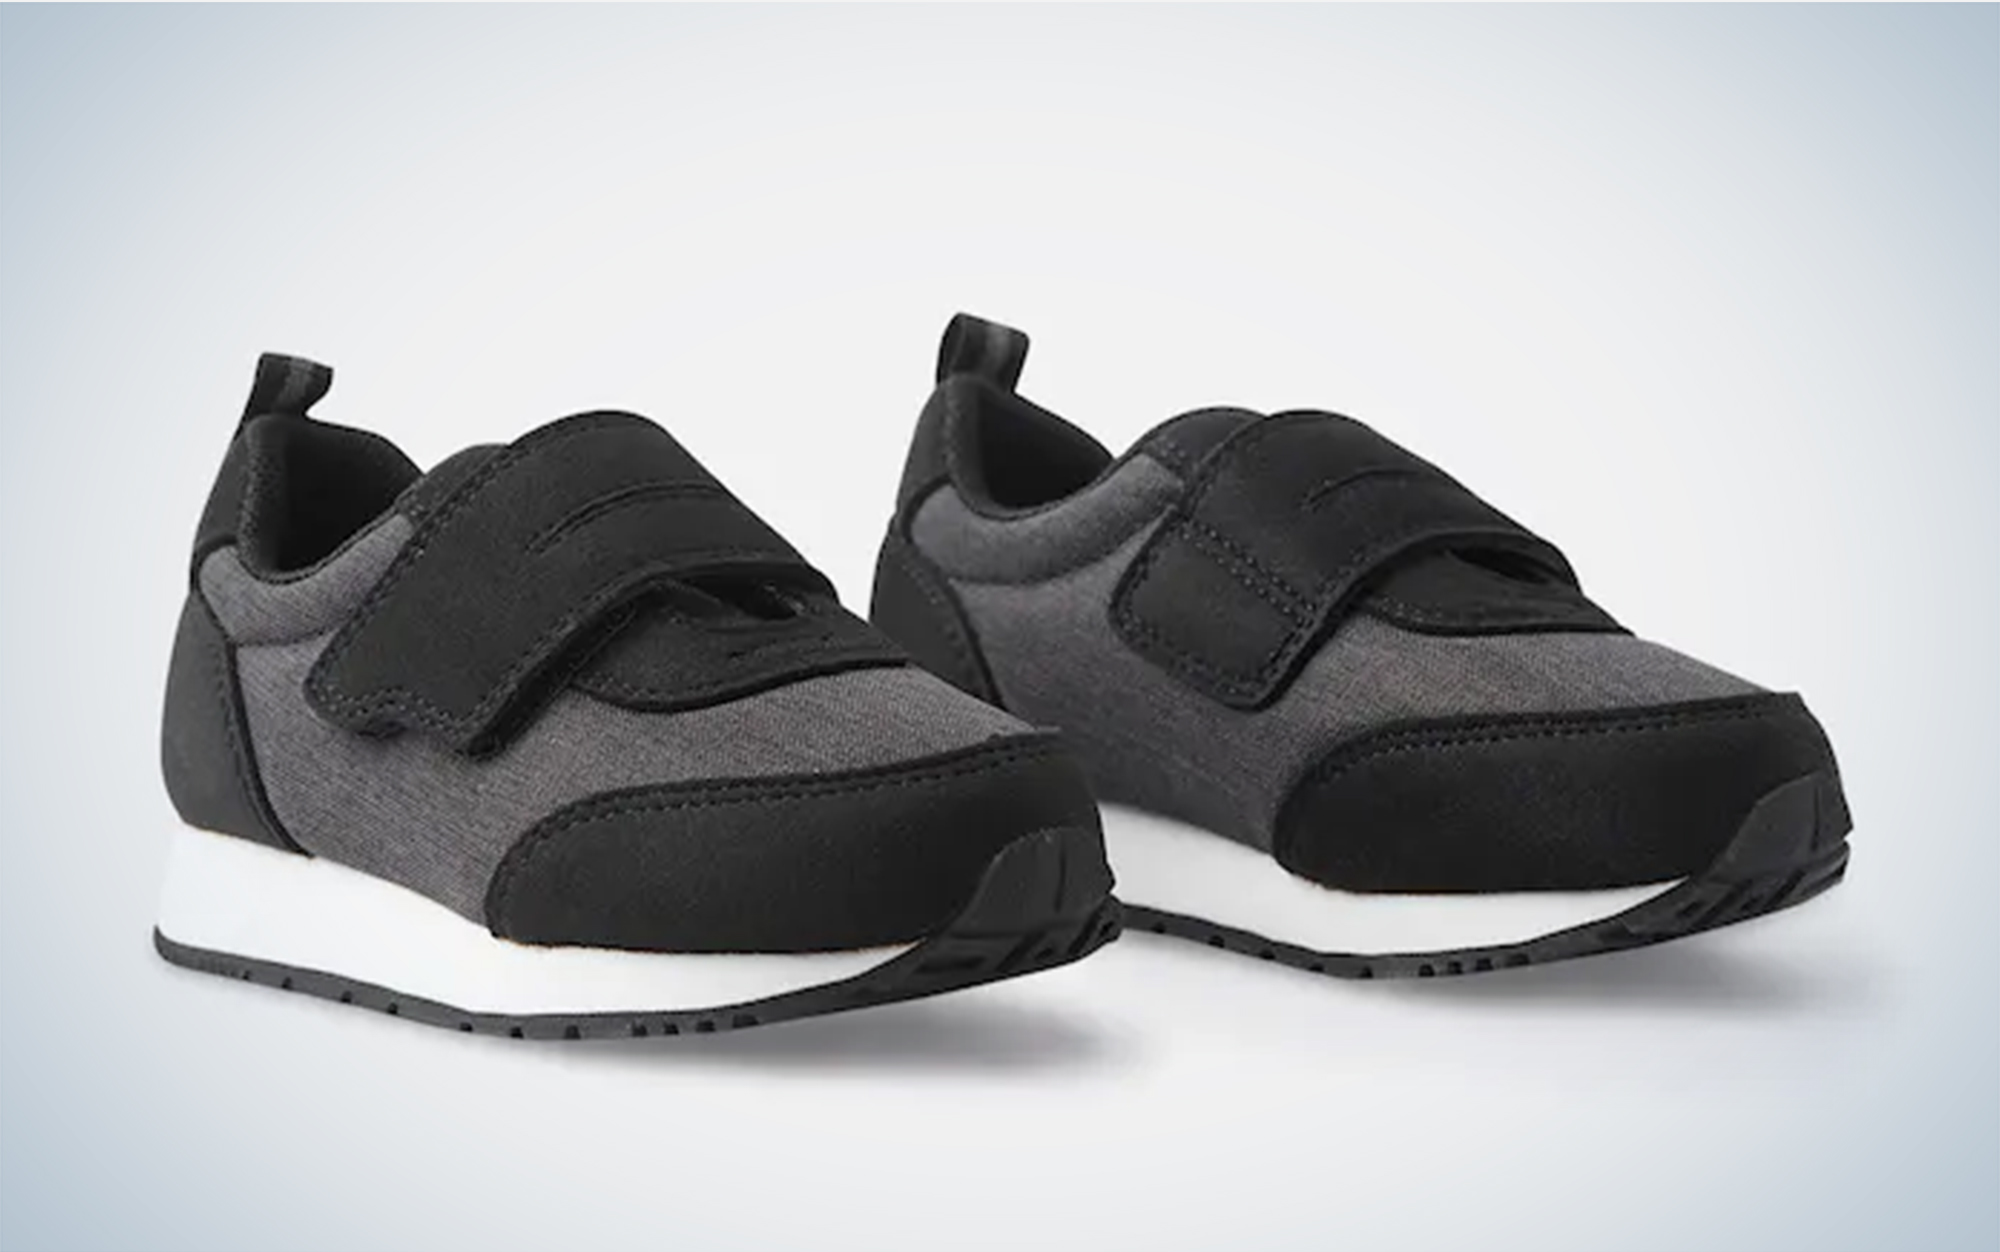 The Reima Toddlers' Evaste are the easiest kids' hiking shoe to pull on.